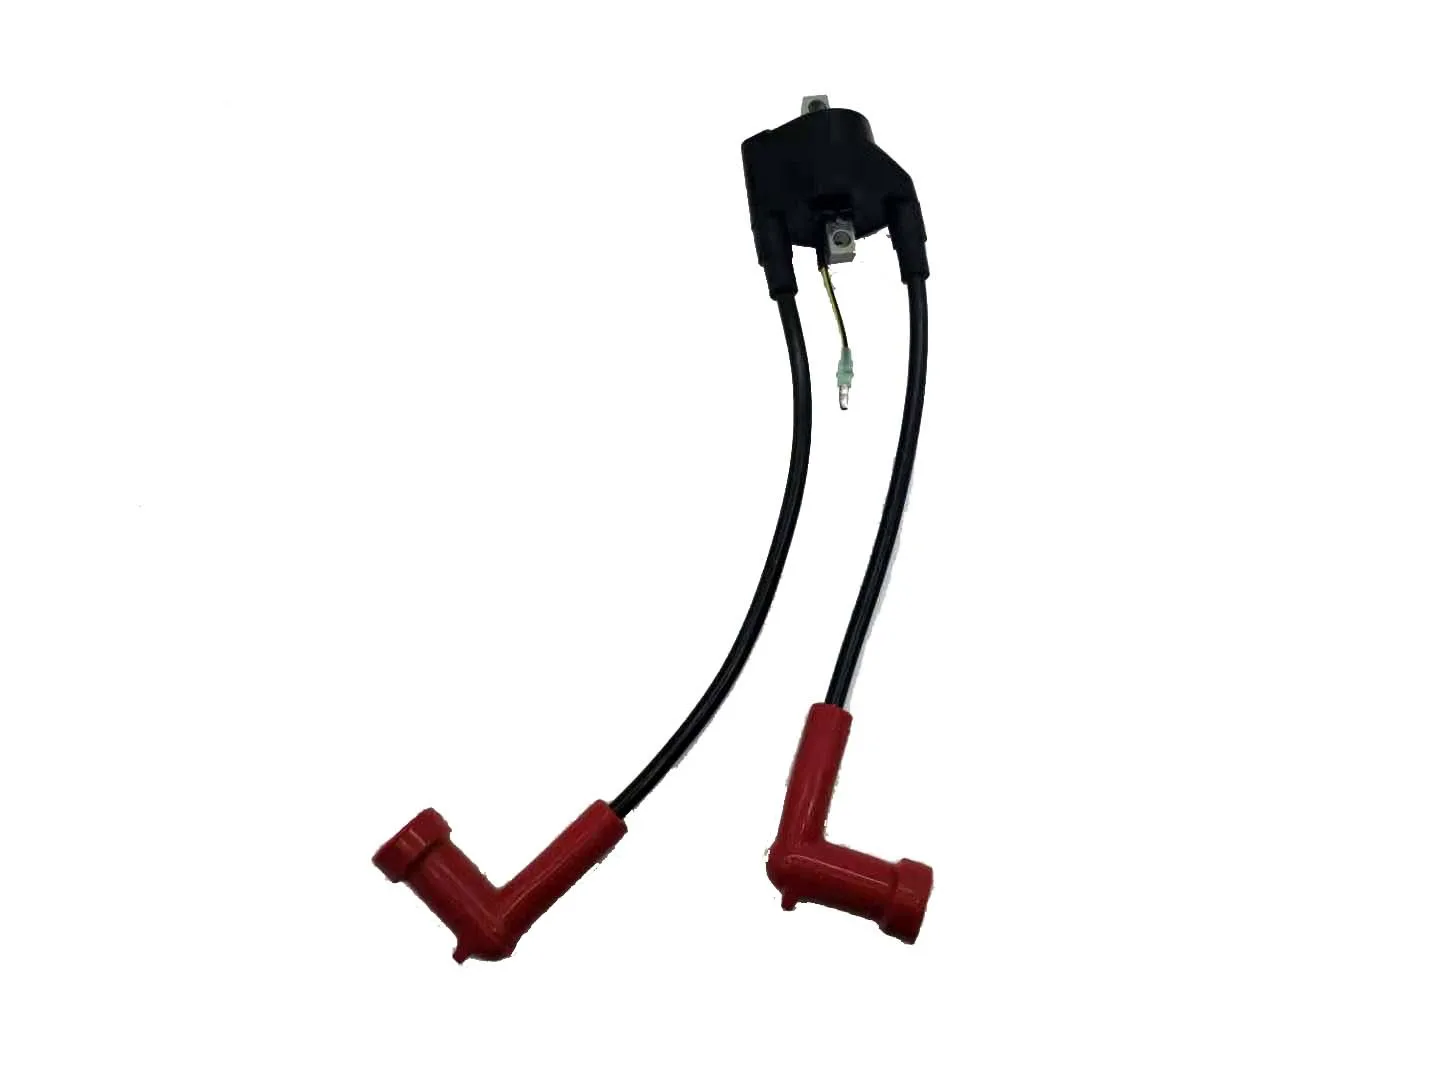 Outboard Ignition Coil for Tohatsu&Nissan/Mercury 16064T02,16064T03,16064T05,18-5166,189-3381 9.9/15/18/25/30/40HP(1993-2016)